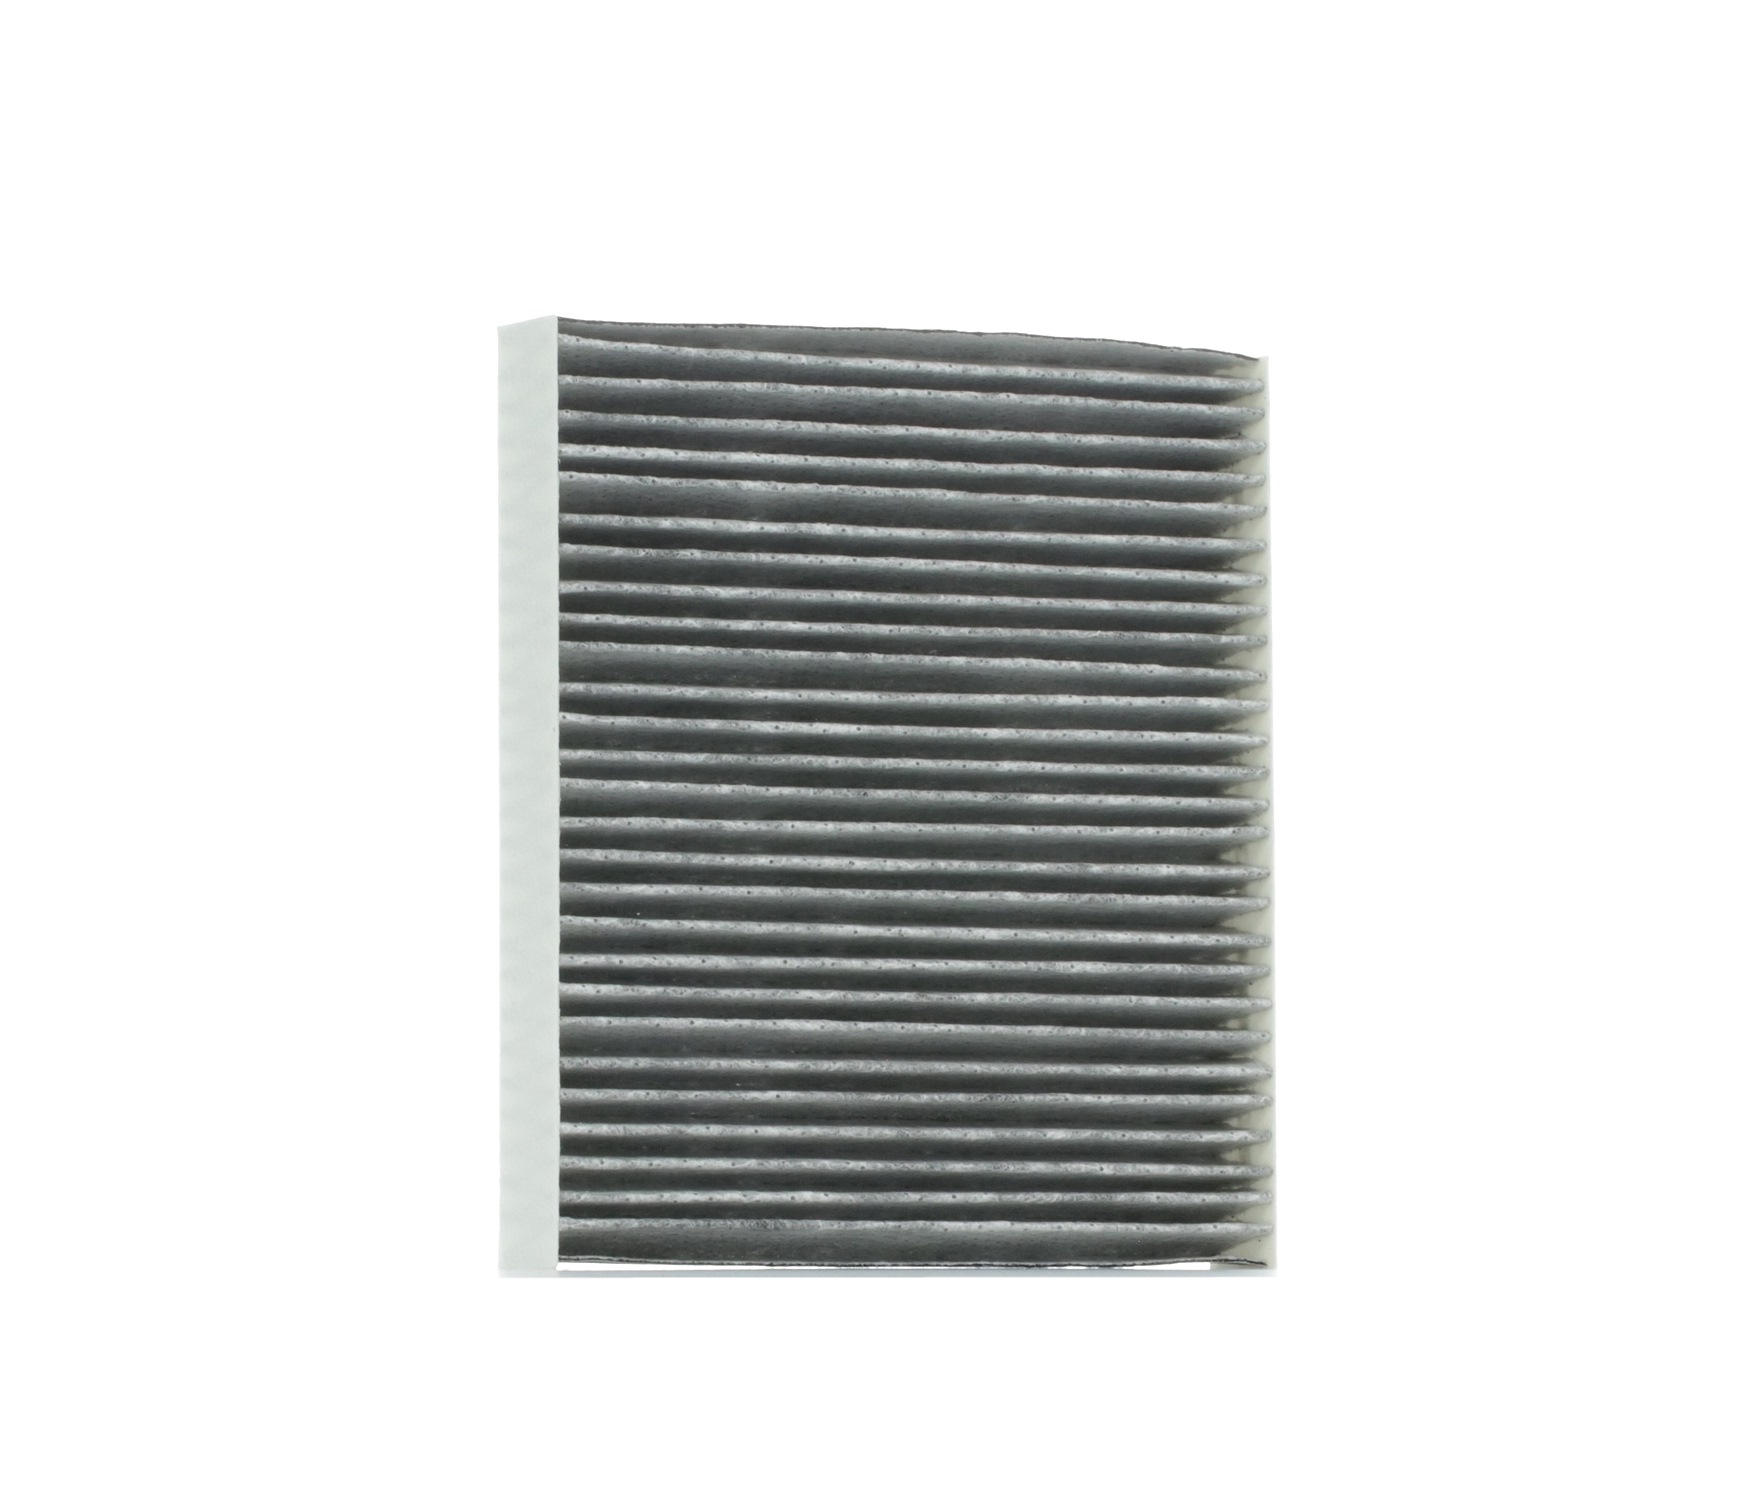 70348491 MAHLE ORIGINAL Activated Carbon Filter, 210,0 mm x 185 mm x 30,0 mm Width: 185mm, Height: 30,0mm, Length: 210,0mm Cabin filter LAK 345 buy